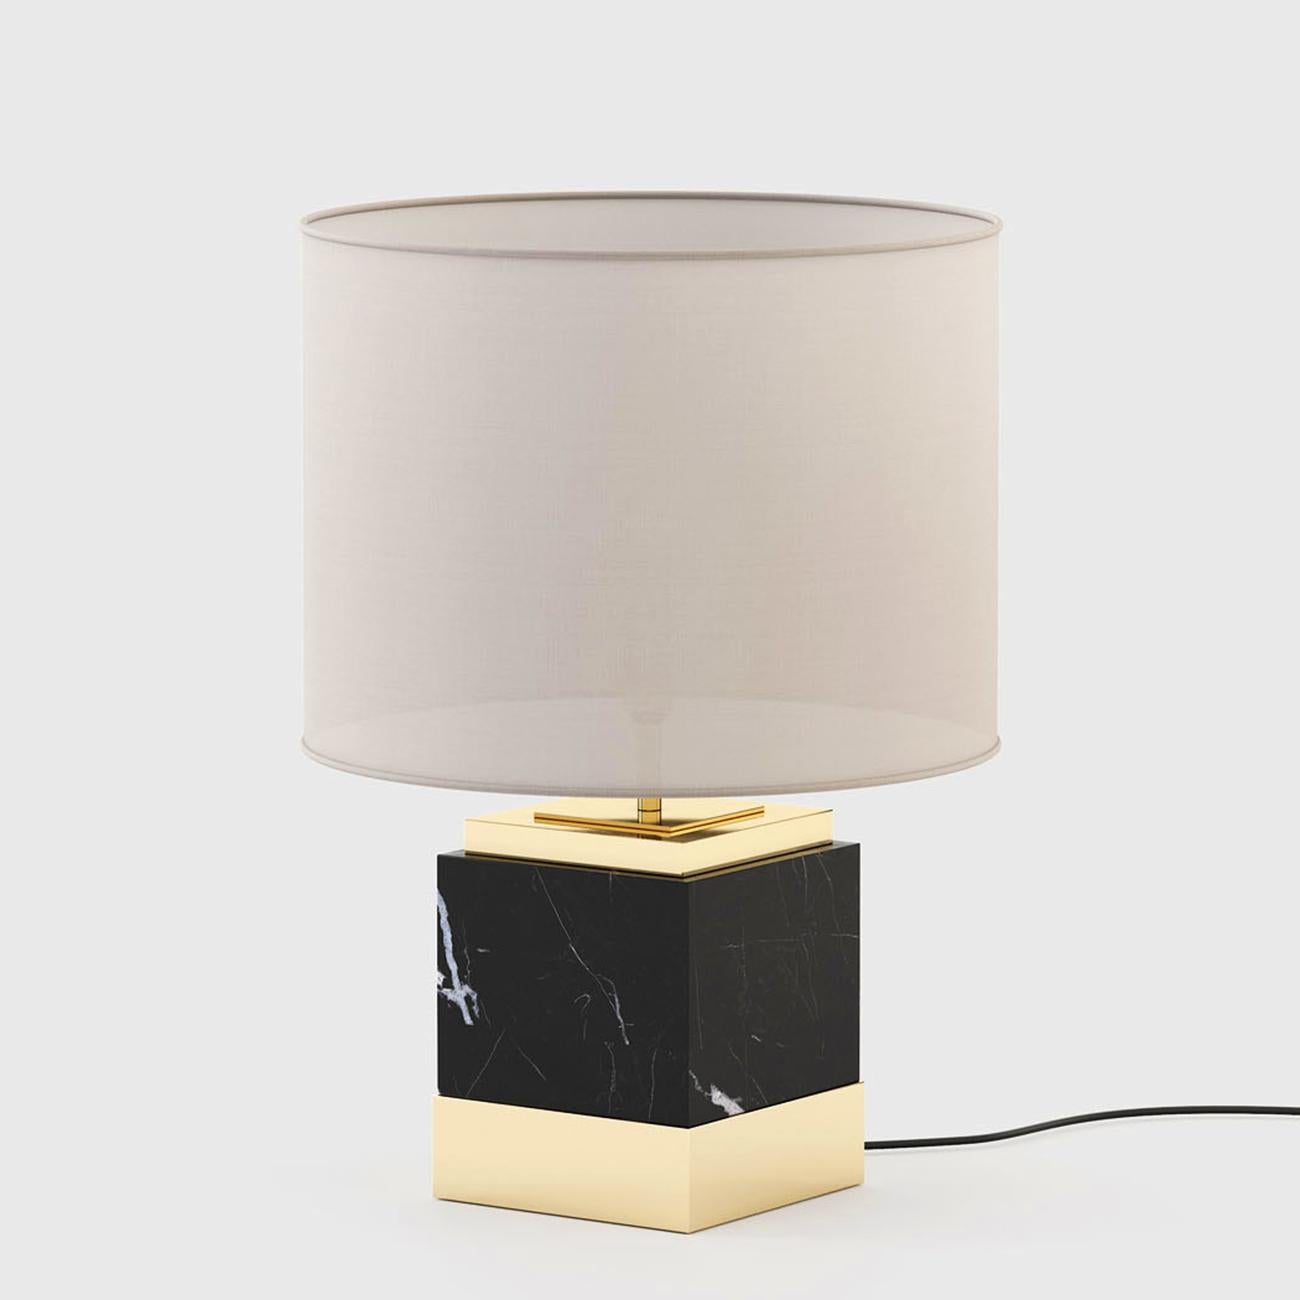 Table lamp Rocks with black marble base
with polished stainless steel in gold finish,
including a white cotton shade. With 1 bulb,
lamp holder type E27, max 40 watt, bulb not 
included. Also available with emperor brown 
marble on